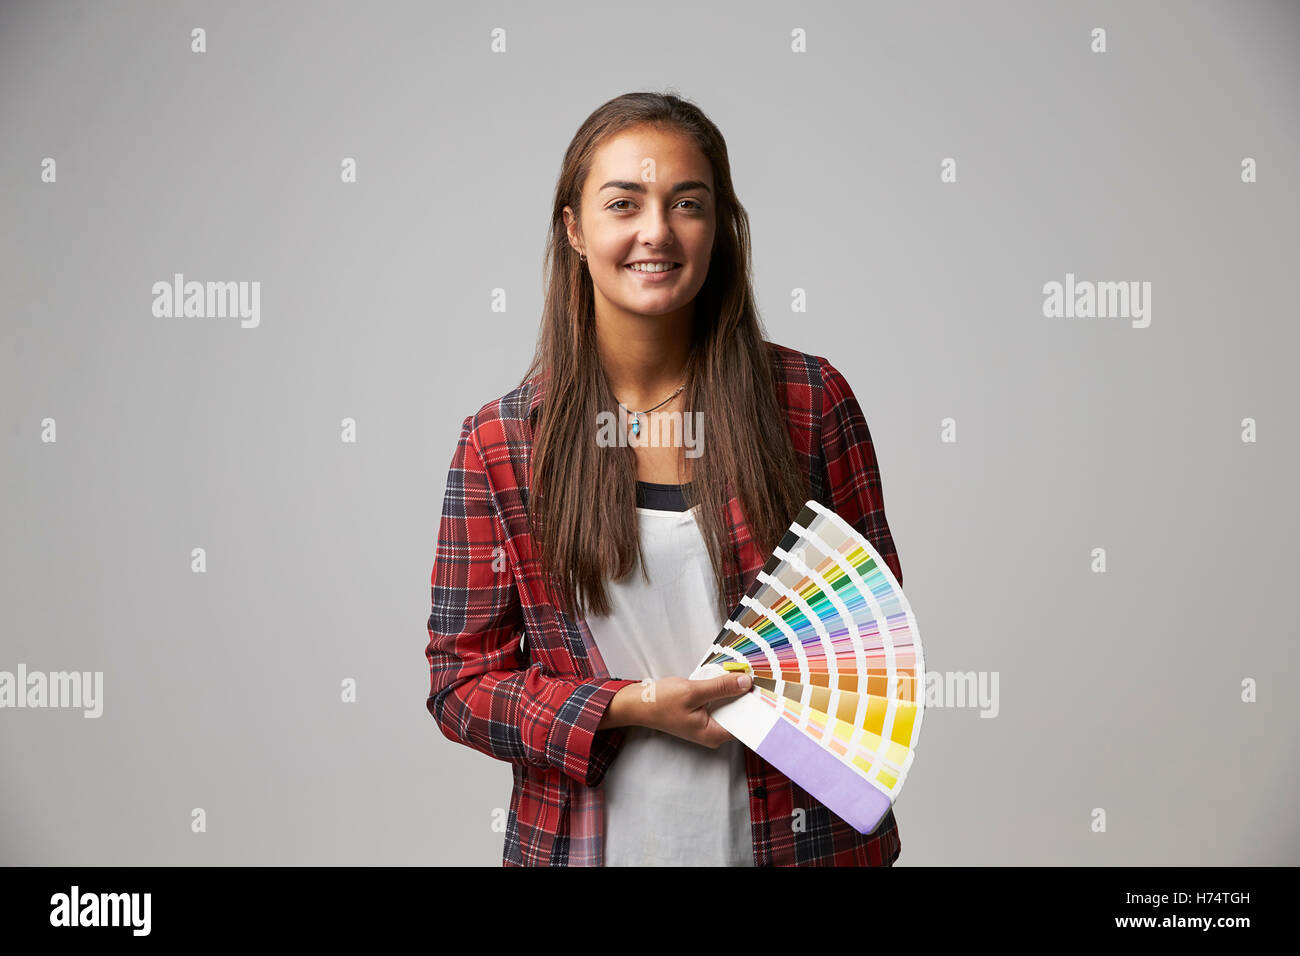 Studio Shot Of Female Graphic Designer With Color Swatches Stock Photo